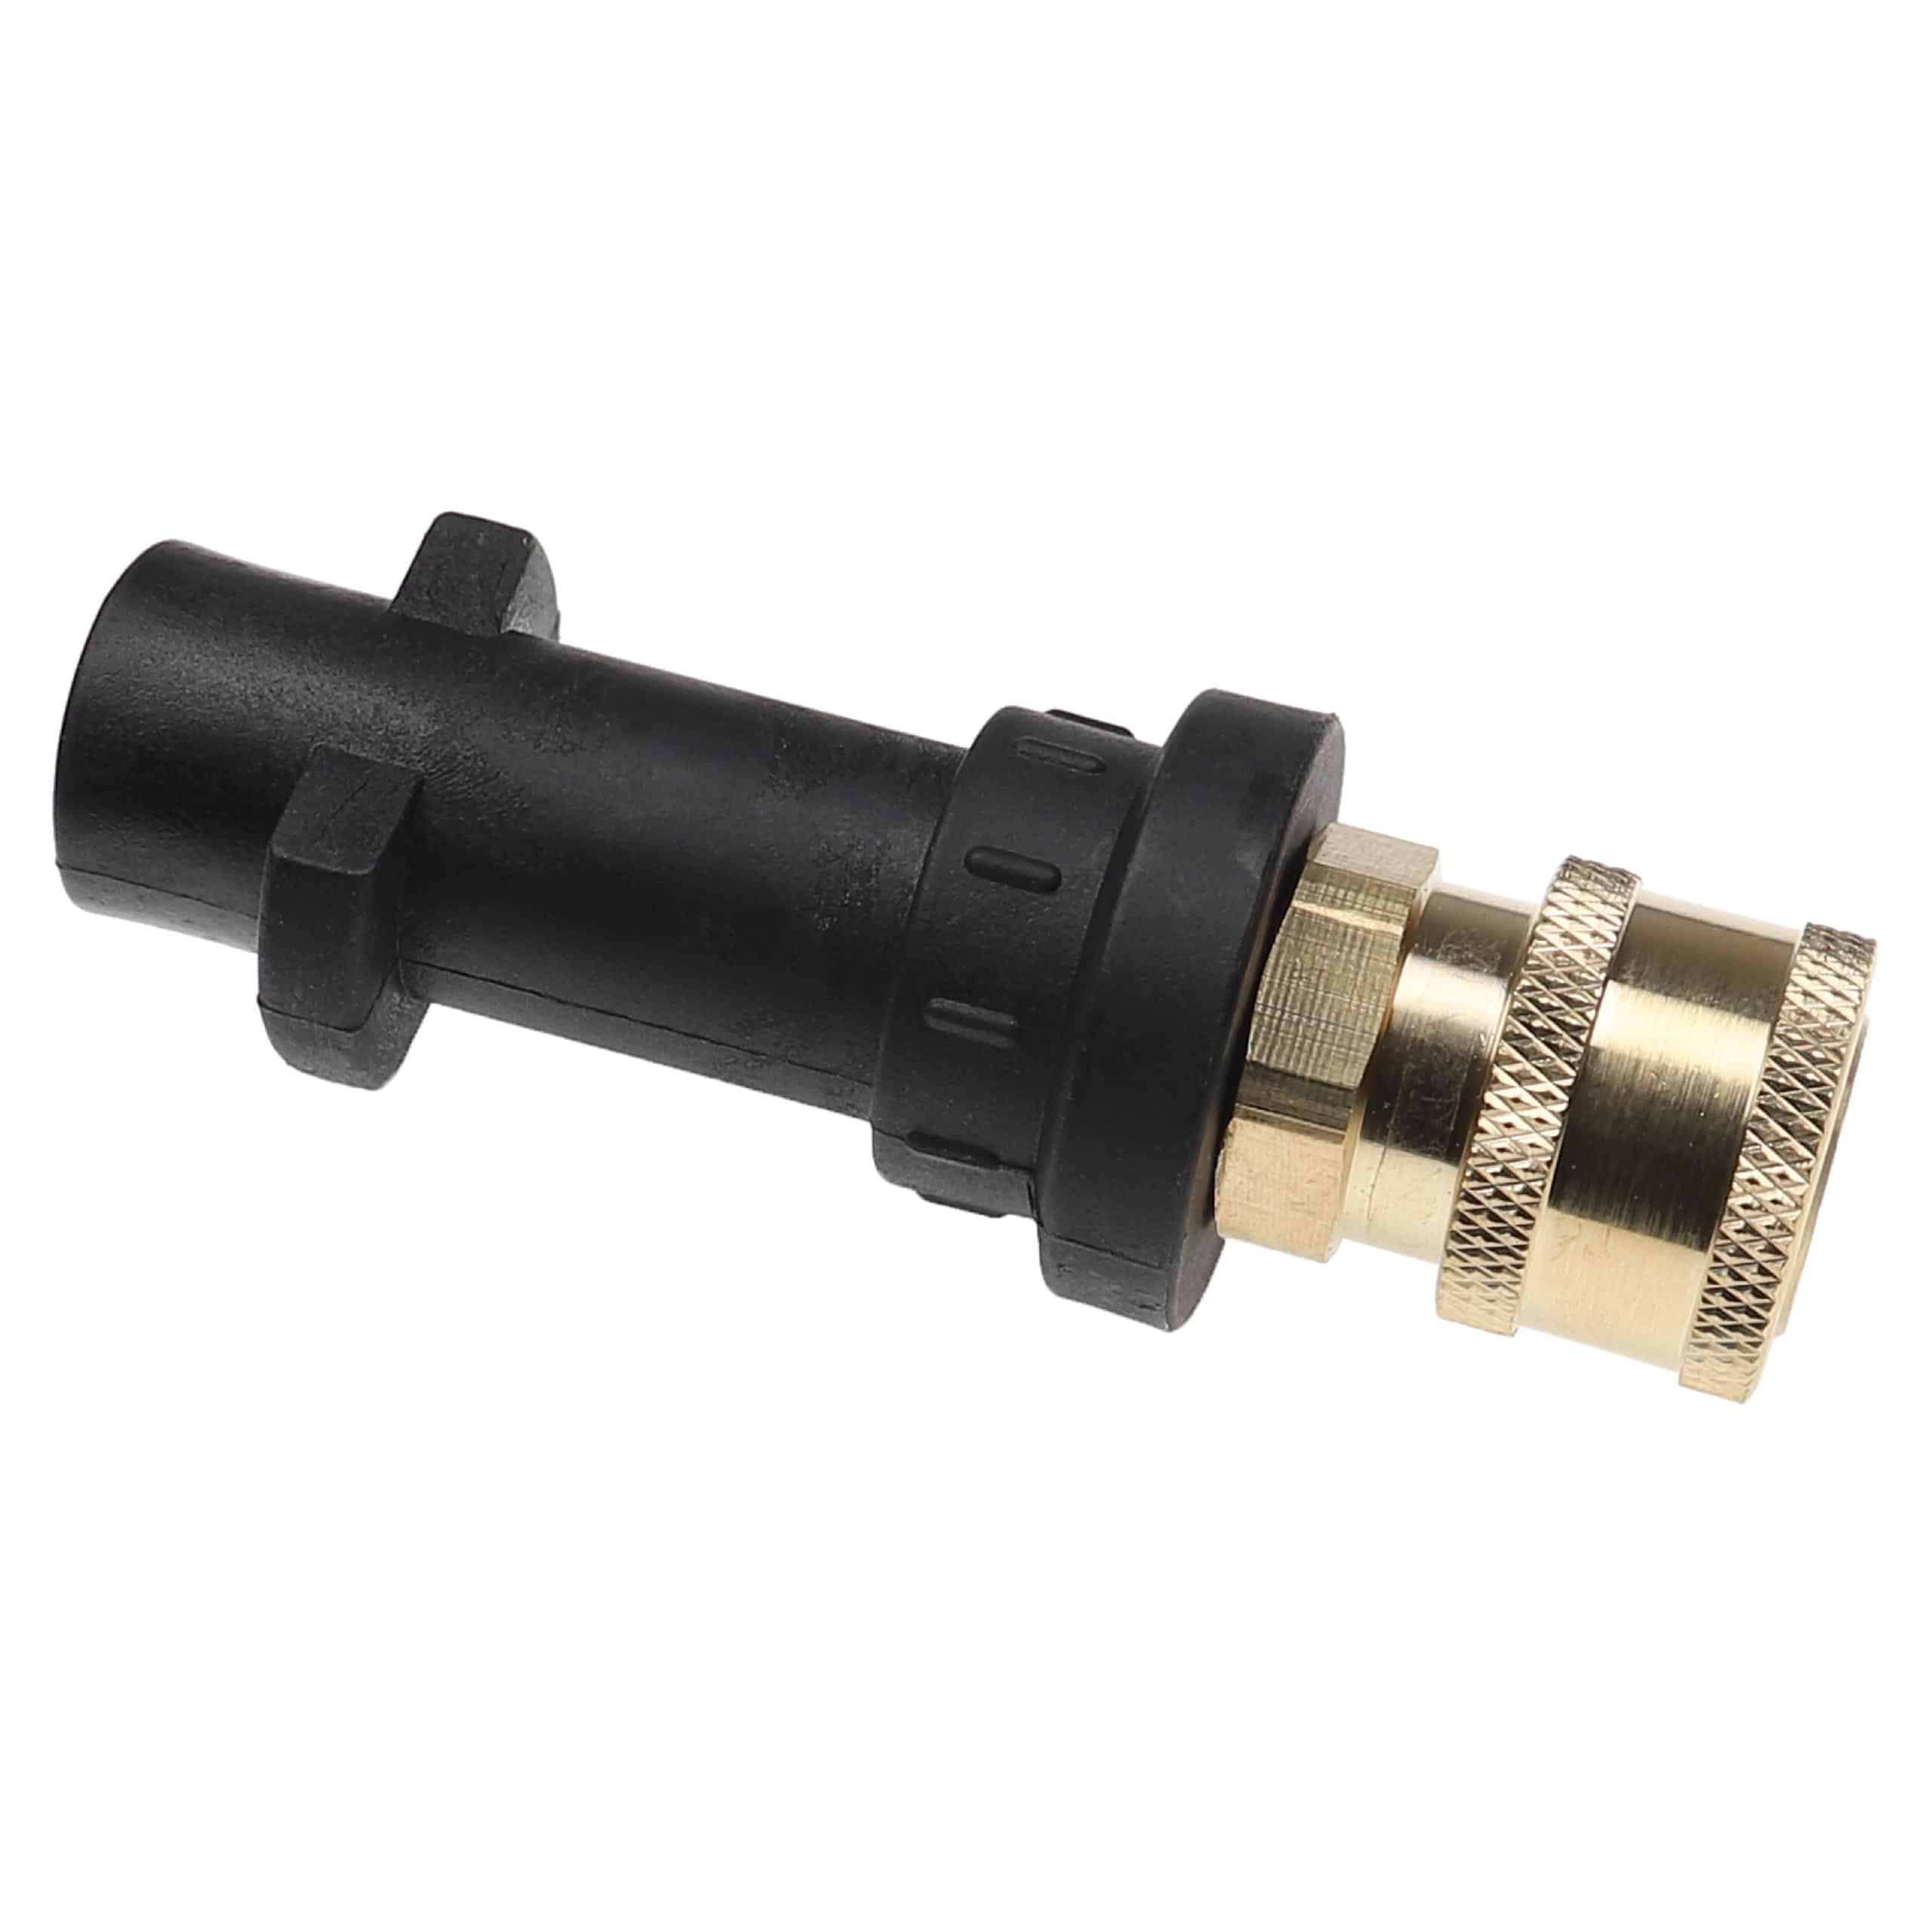 vhbw Adapter A Bayonet to M22 Thread High-Pressure Cleaner - With 1/4 Inch Quick Coupling